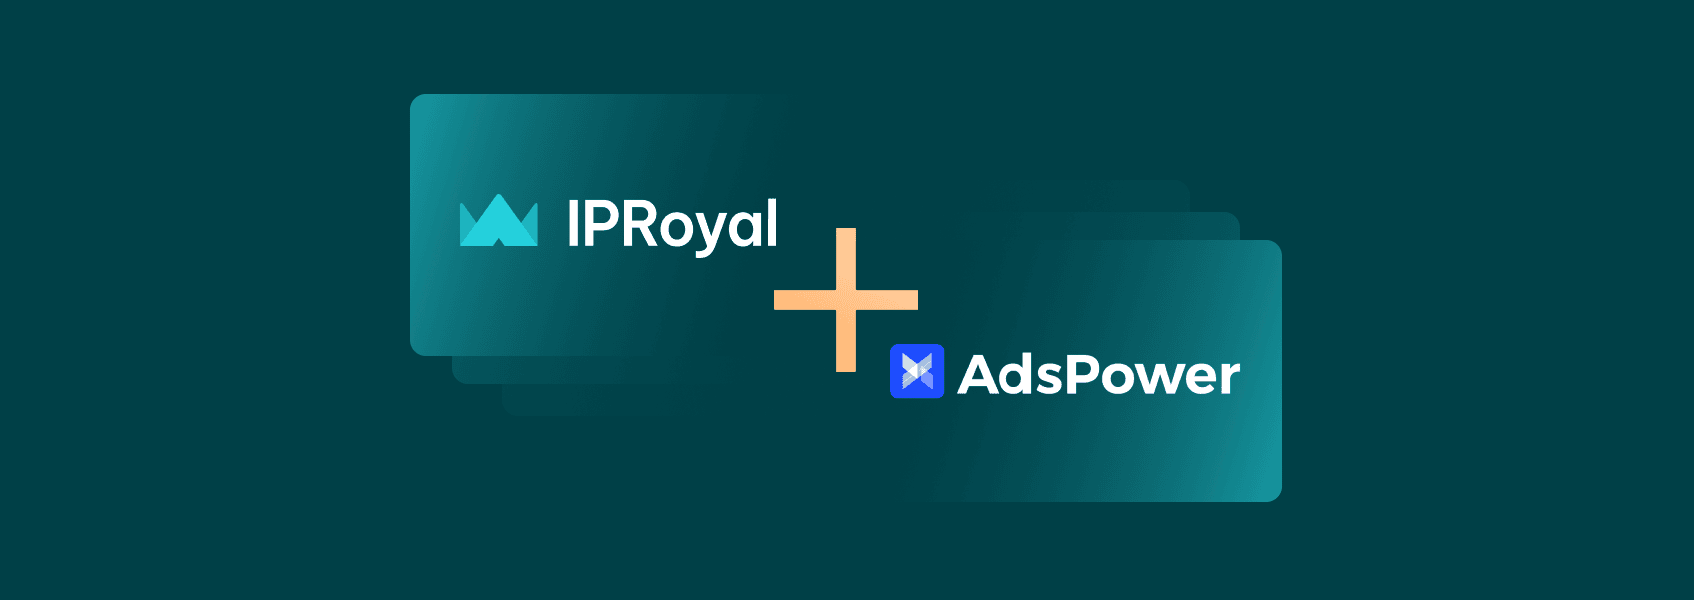 How to Use IPRoyal Proxies With AdsPower